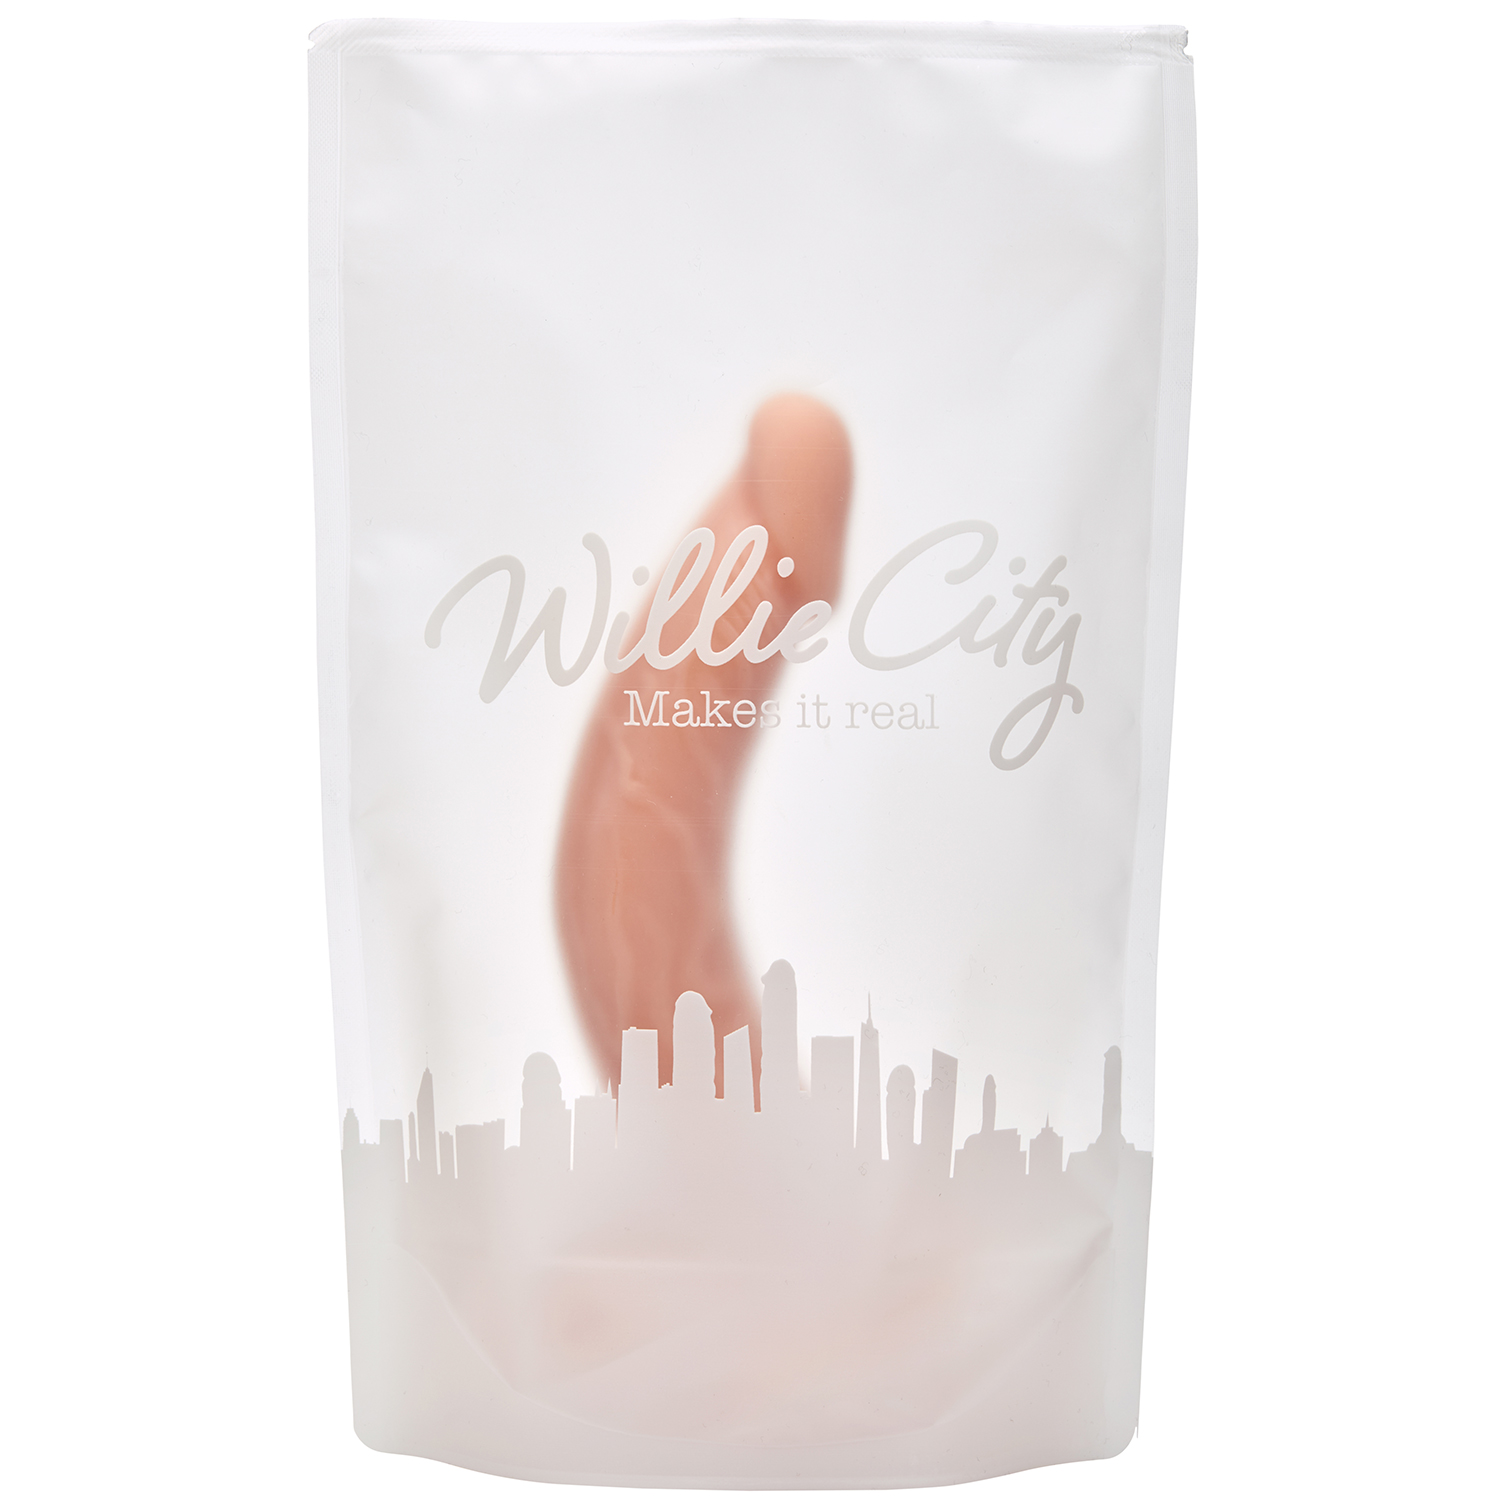 Willie City Classic Realistisk Curved Dildo 20 cm thumbnail